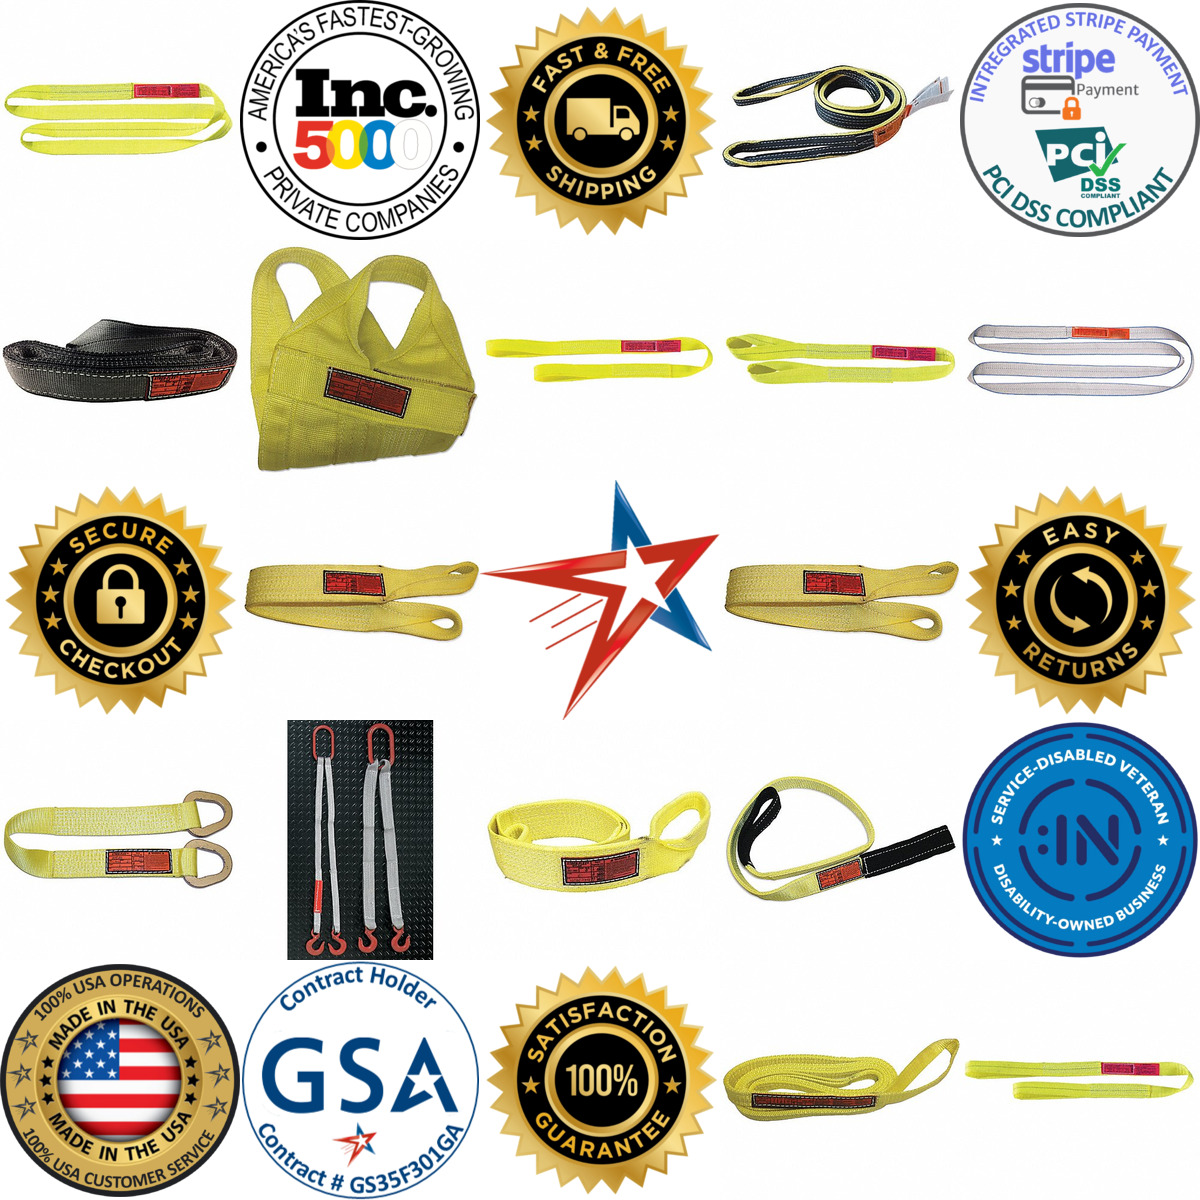 A selection of Web Slings products on GoVets